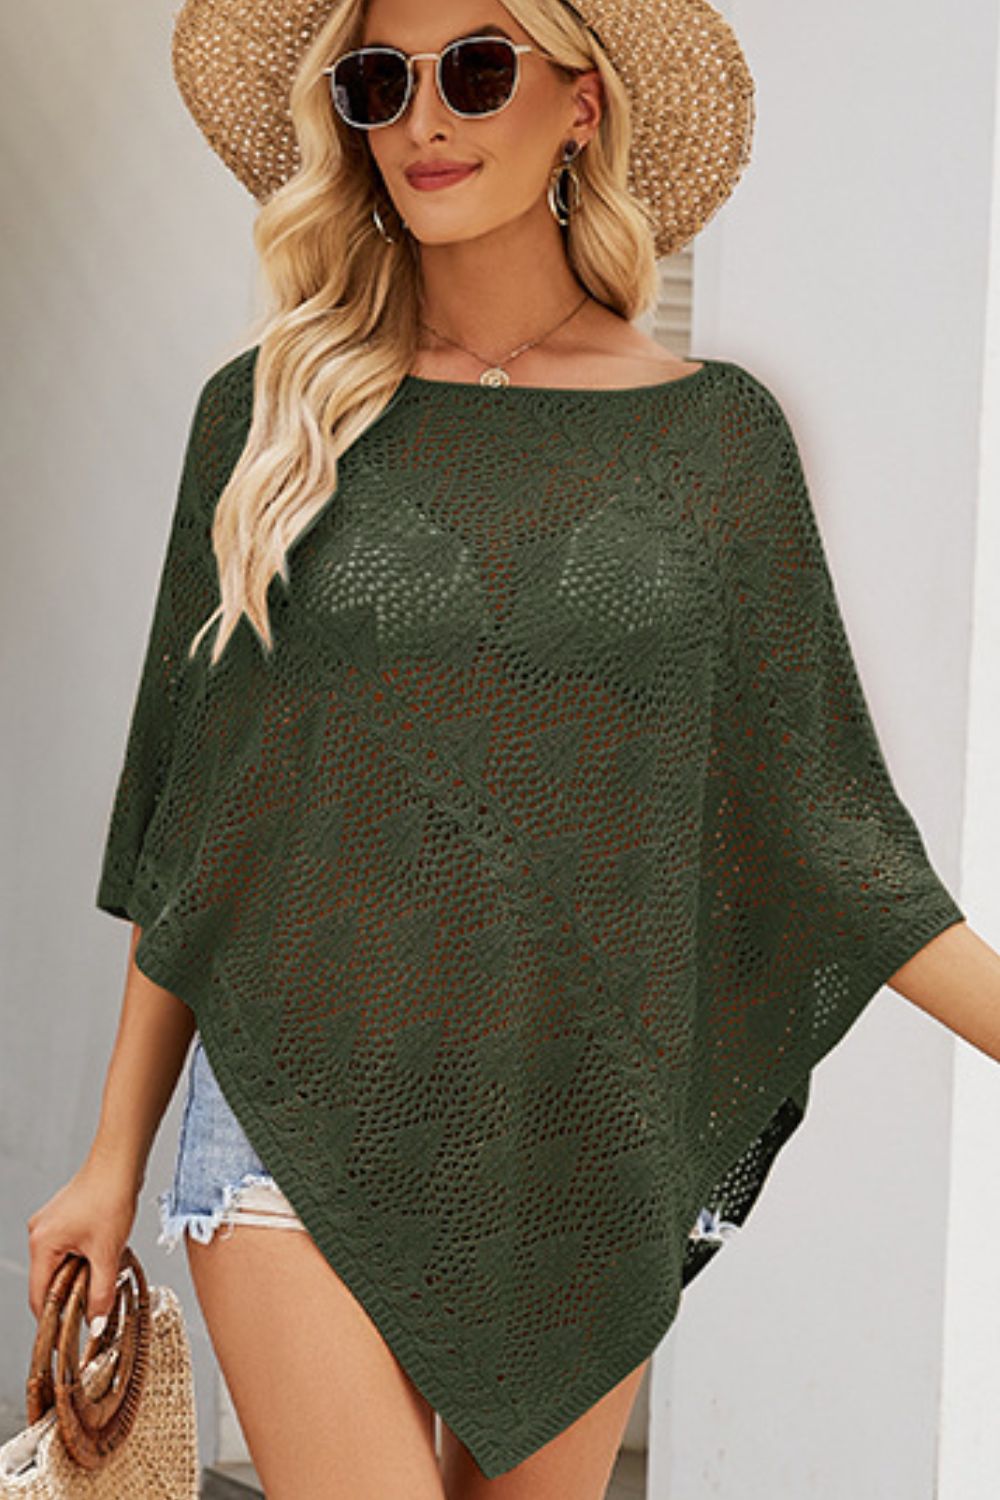 Openwork Boat Neck Shawl Cover Up free shipping -Oh Em Gee Boutique